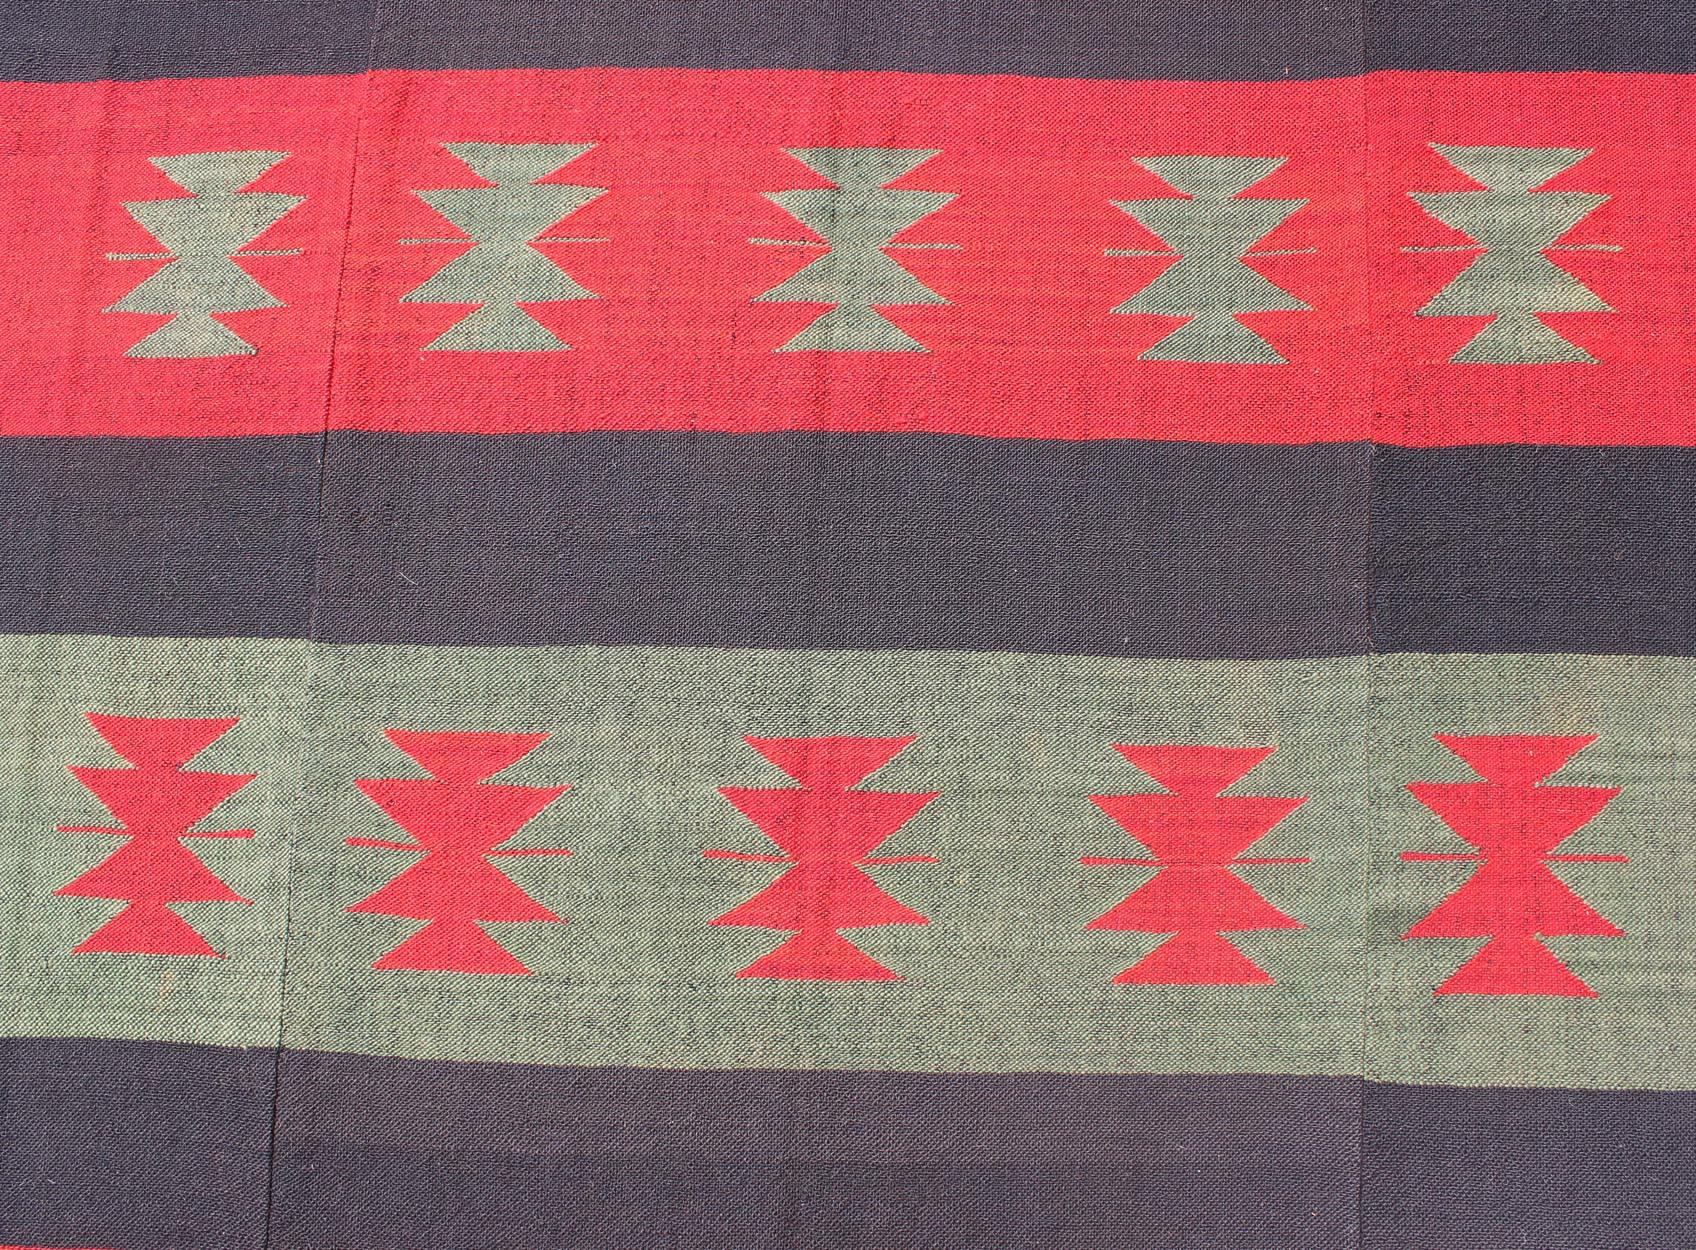 Large Vintage Kilim Rug with Tribal Shapes and Stripes in Red, Brown and Green For Sale 2